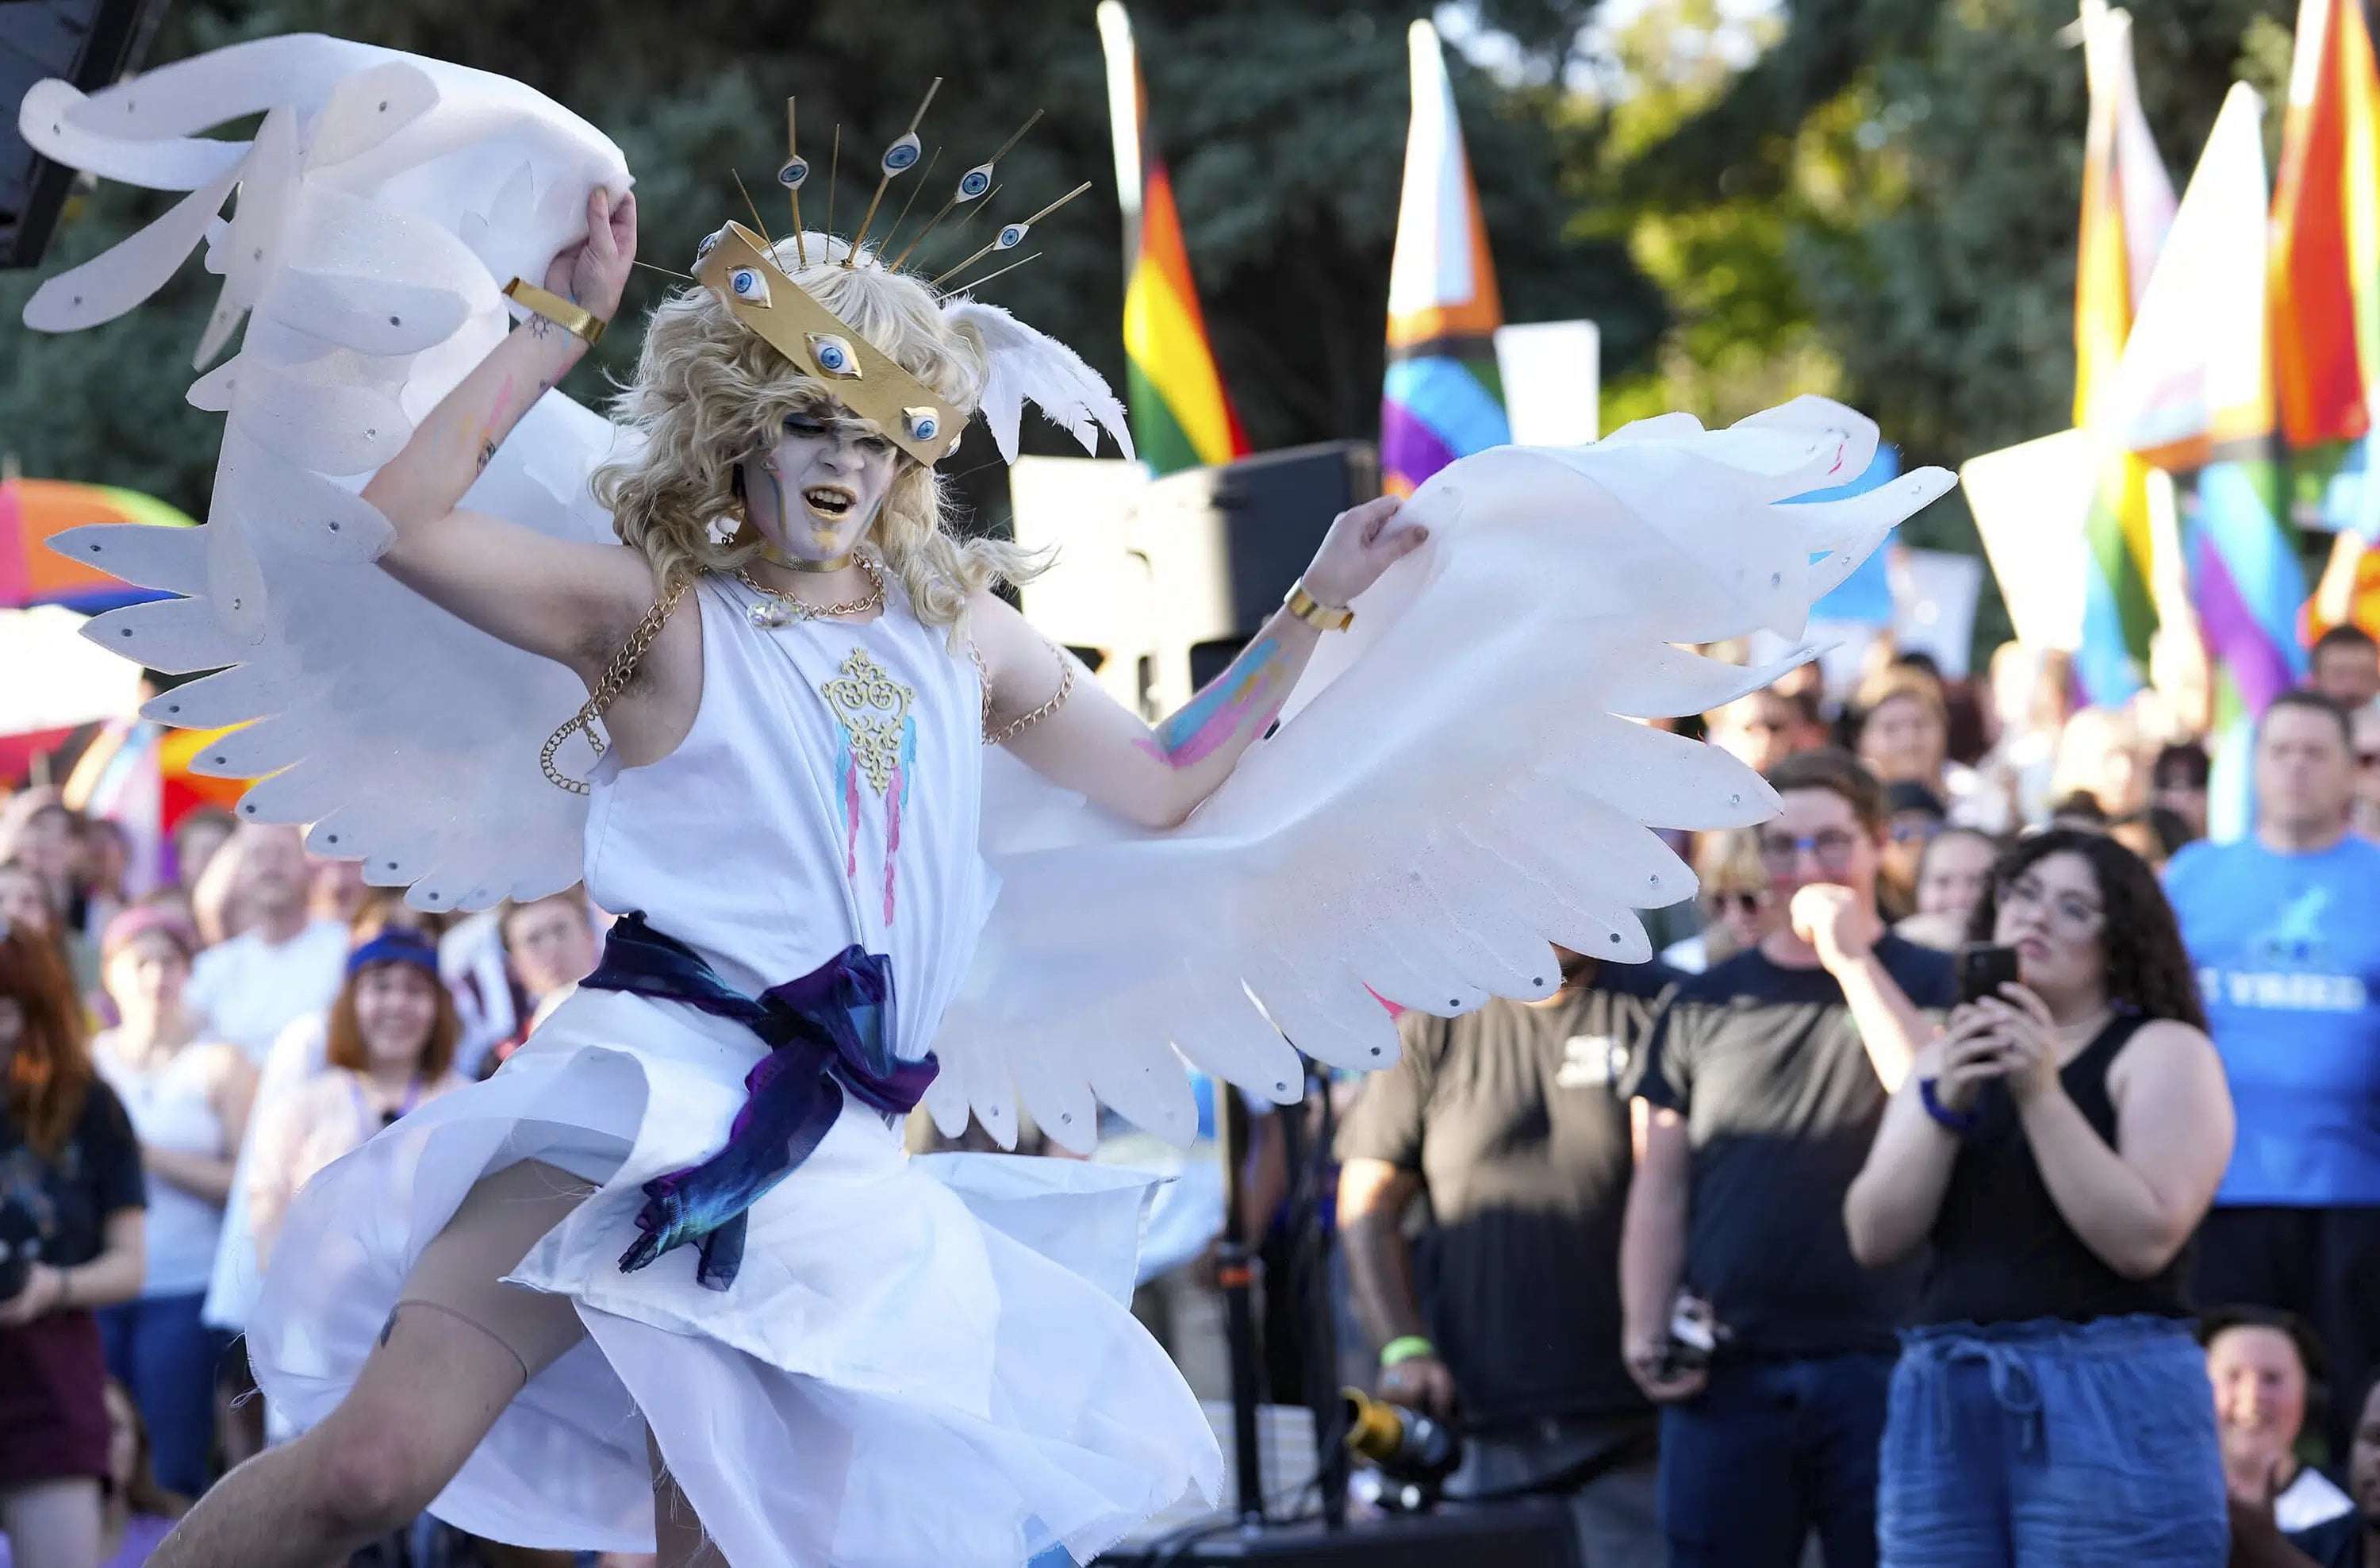 image for A Utah city violated the First Amendment in denying a drag show permit, judge rules